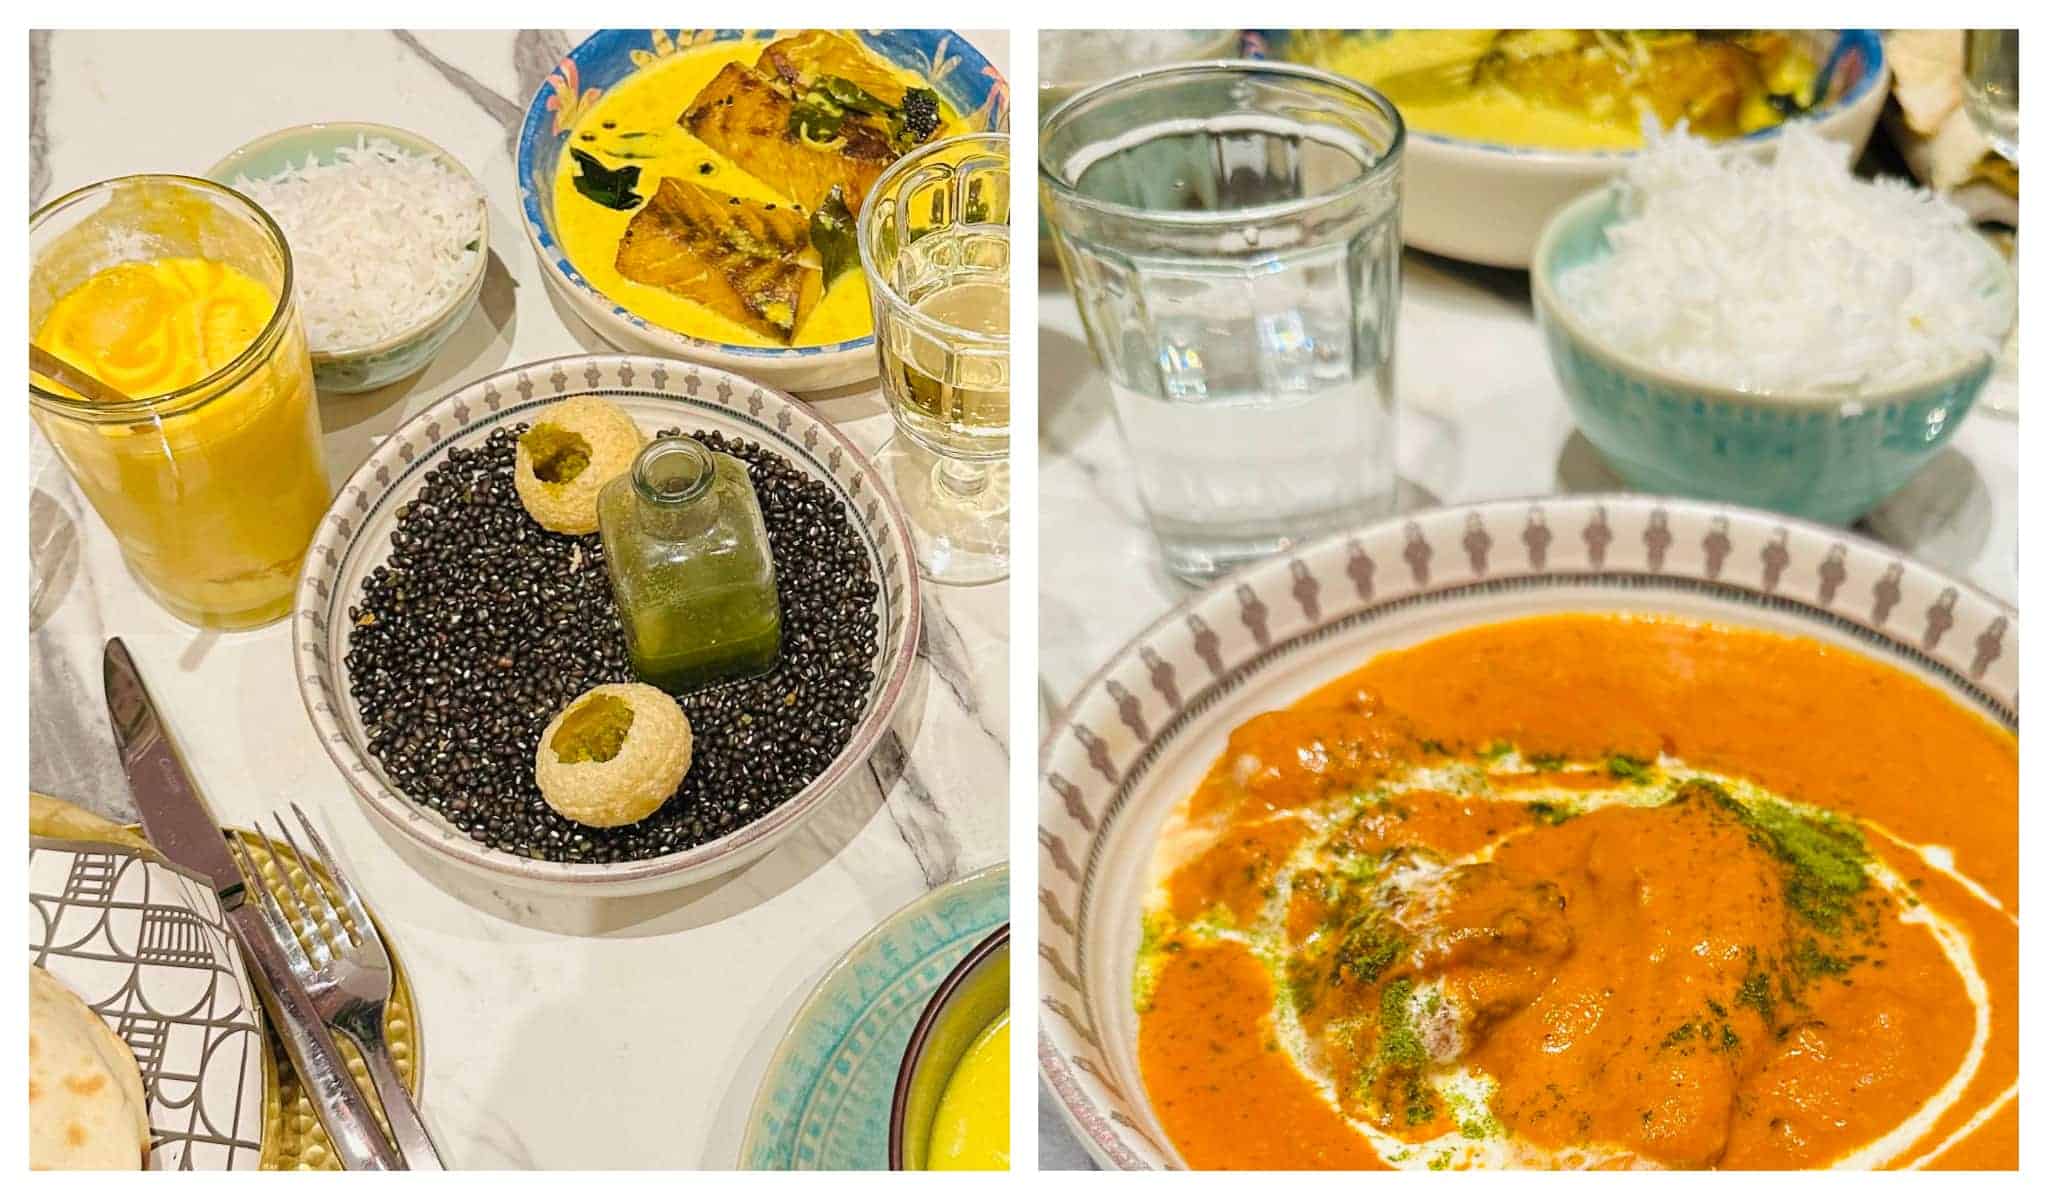 Plates of Indian food served at The Crossing by Jitin Joshi